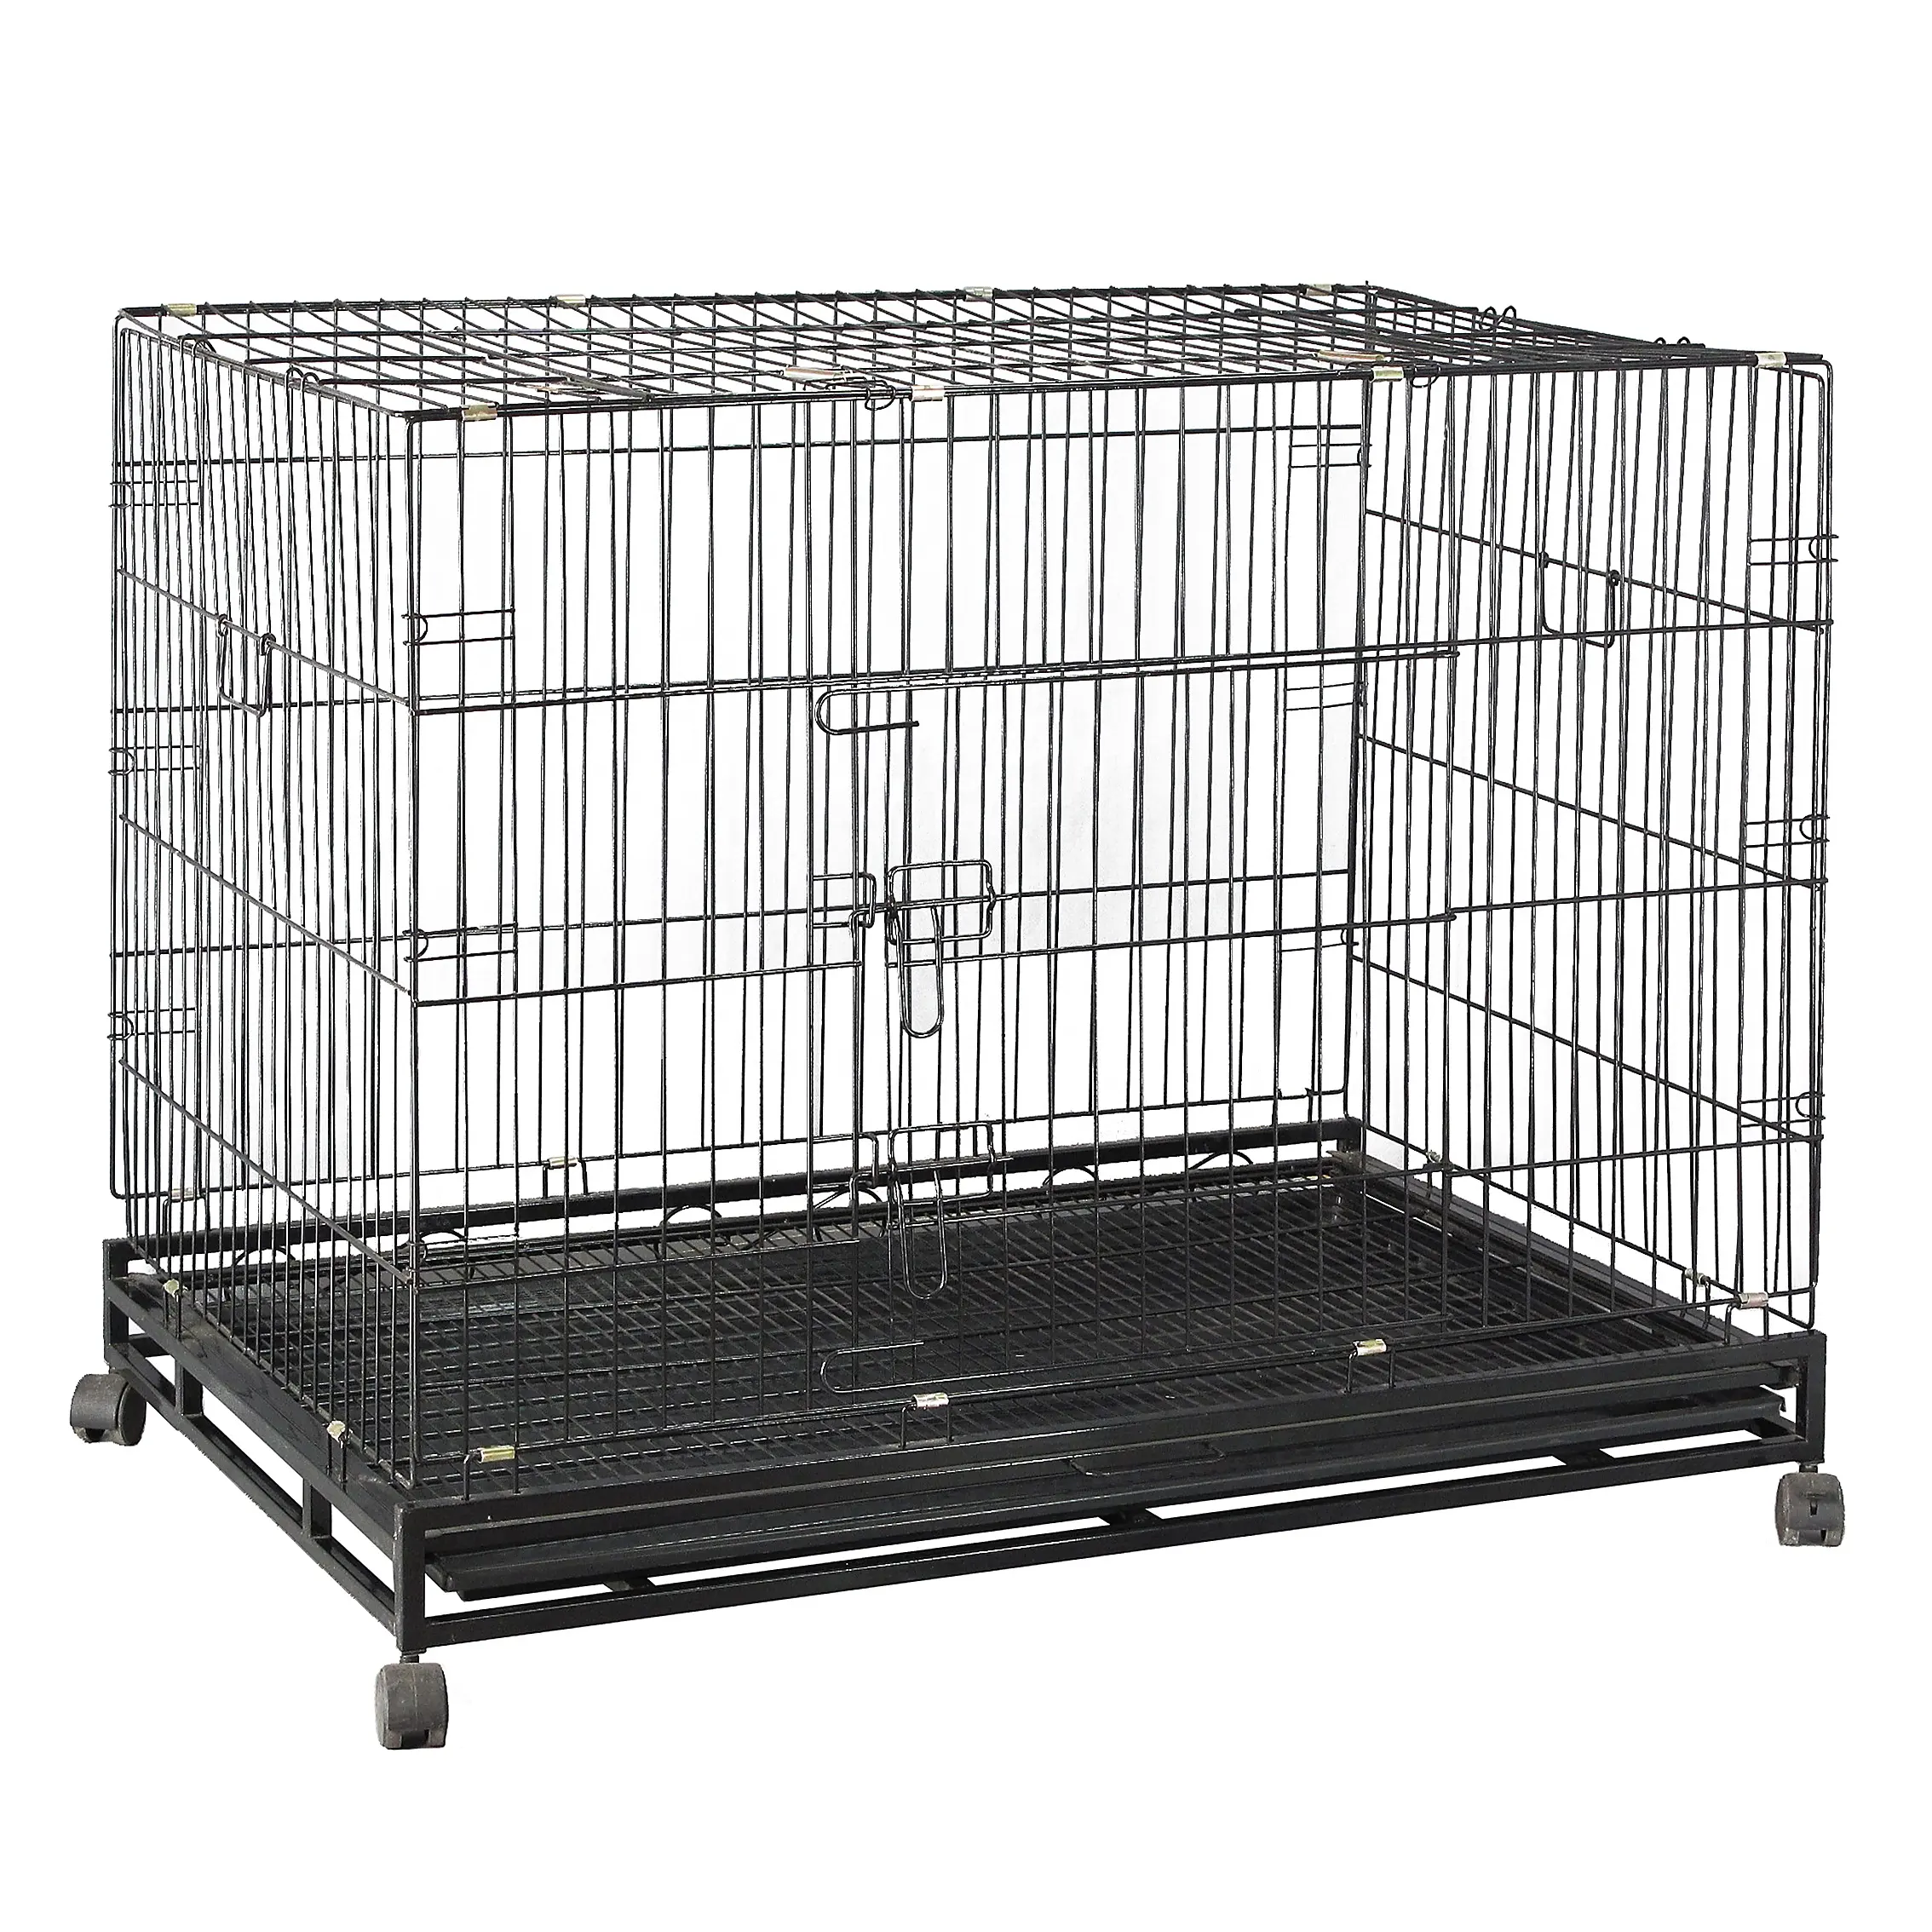 Stainless Steel Dog Cage Kennel Outdoor Used Large Crate Metal Cages For Pet